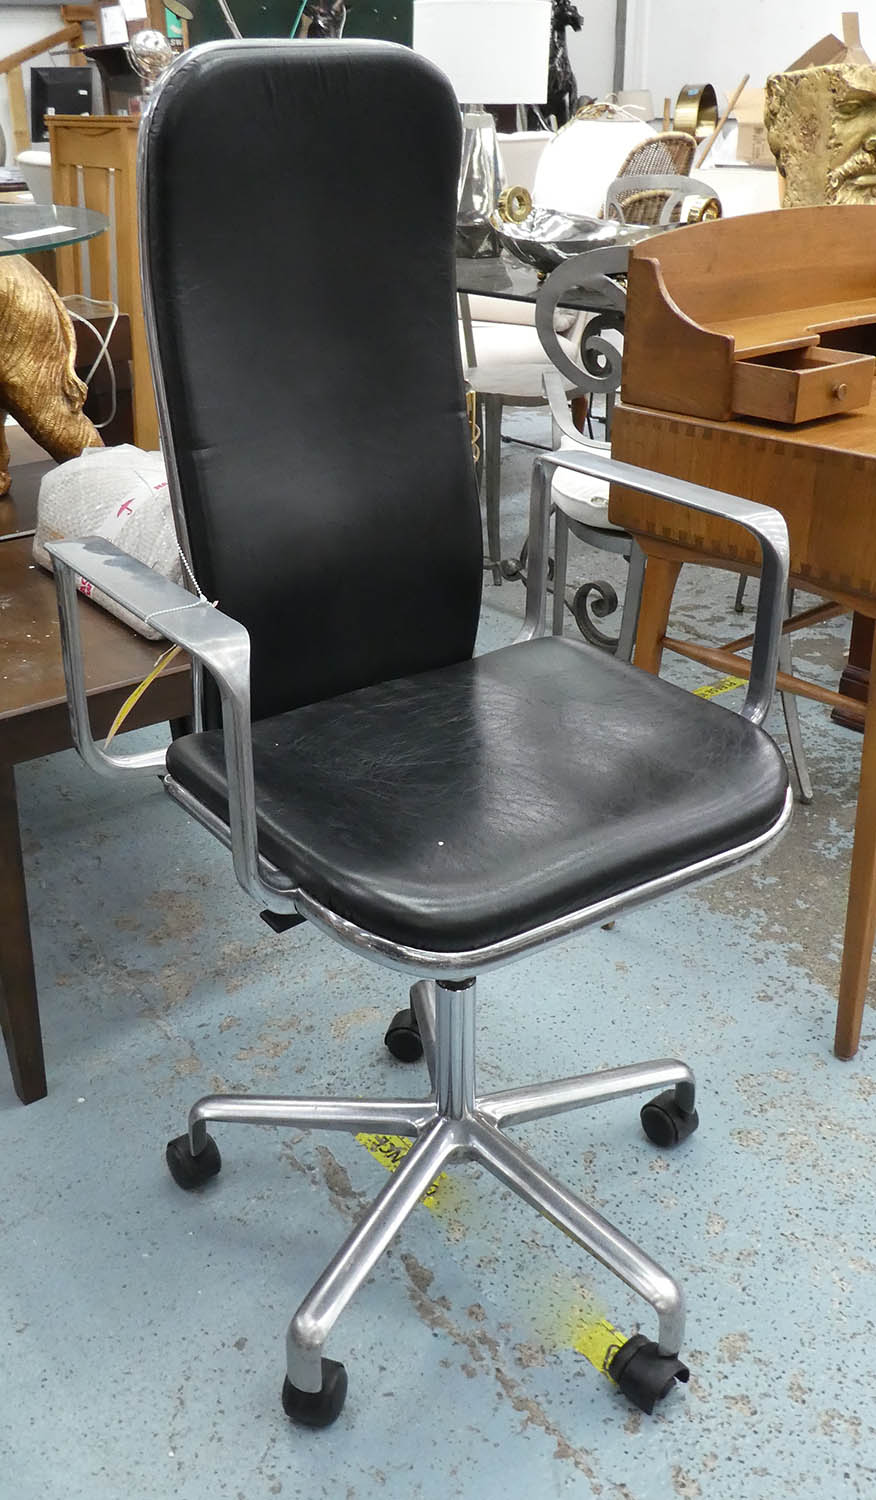 AFTER FREDERICK SCOTT SUPPORTO STYLE DESK CHAIR, 113cm H (one castor damaged).